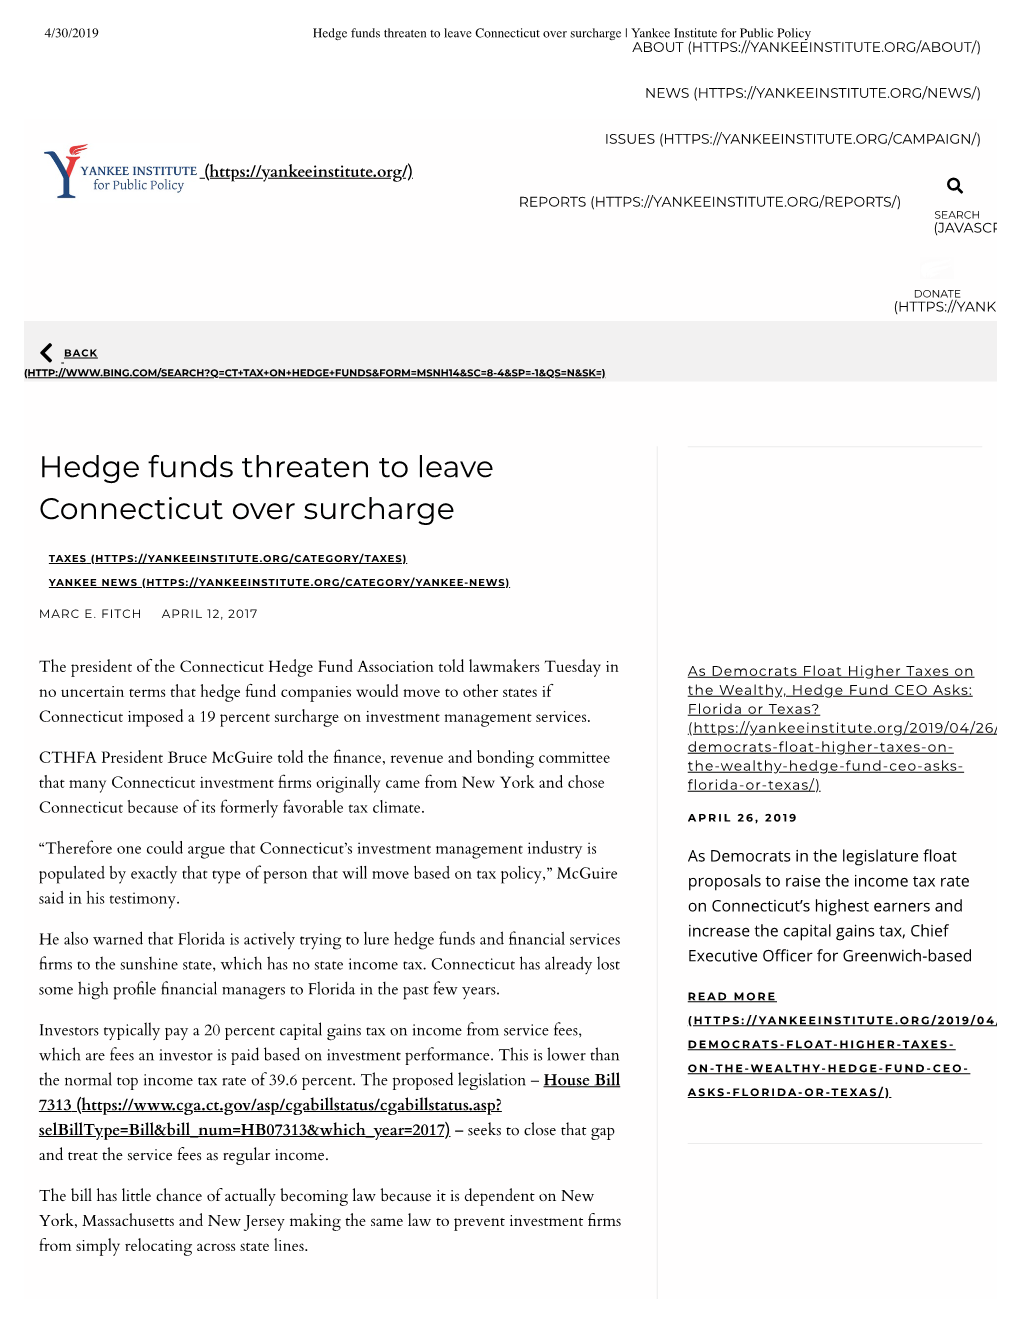 Hedge Funds Threaten to Leave Connectic...E | Yankee Institute For